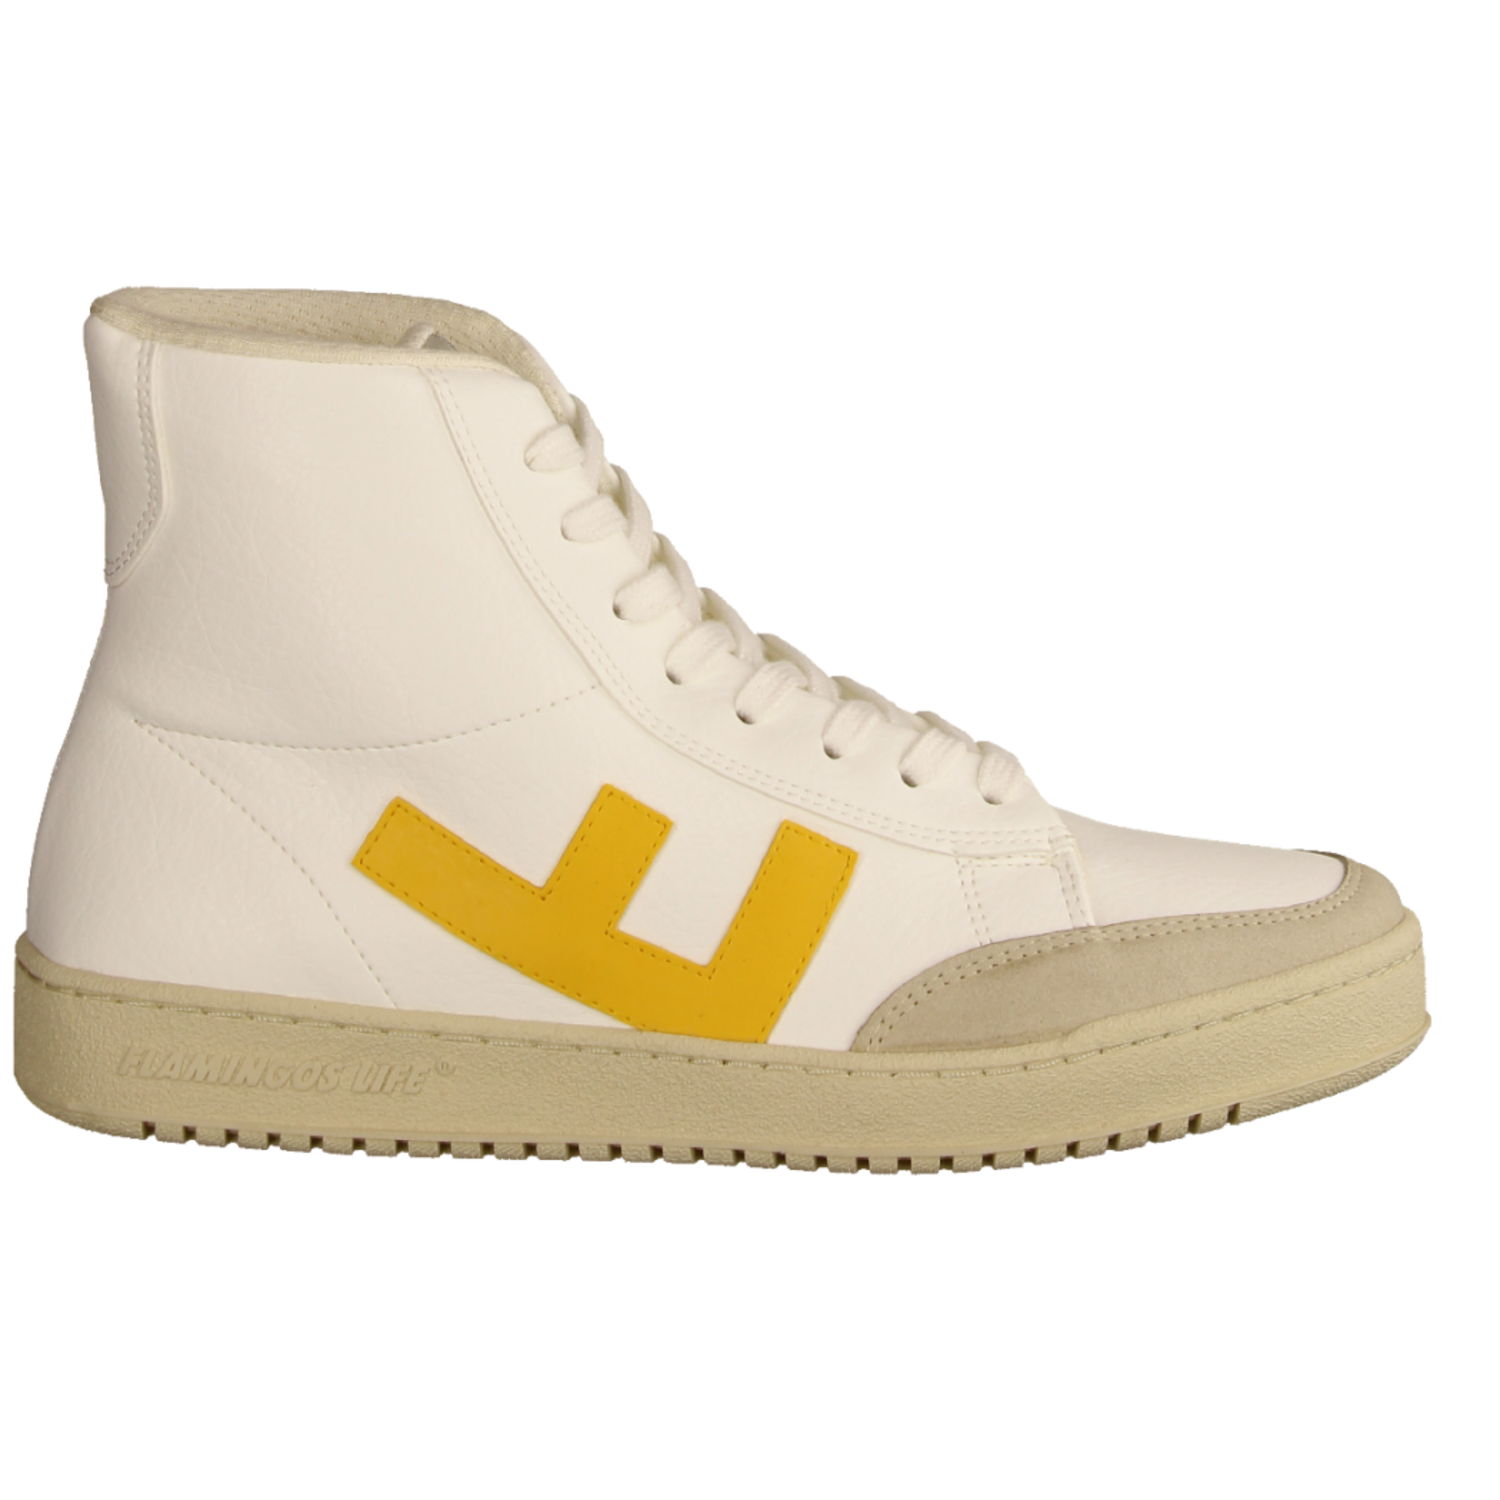 Flamingo\'s Life Old 80s Damen Boots in White Yellow White Yellow (weiß)